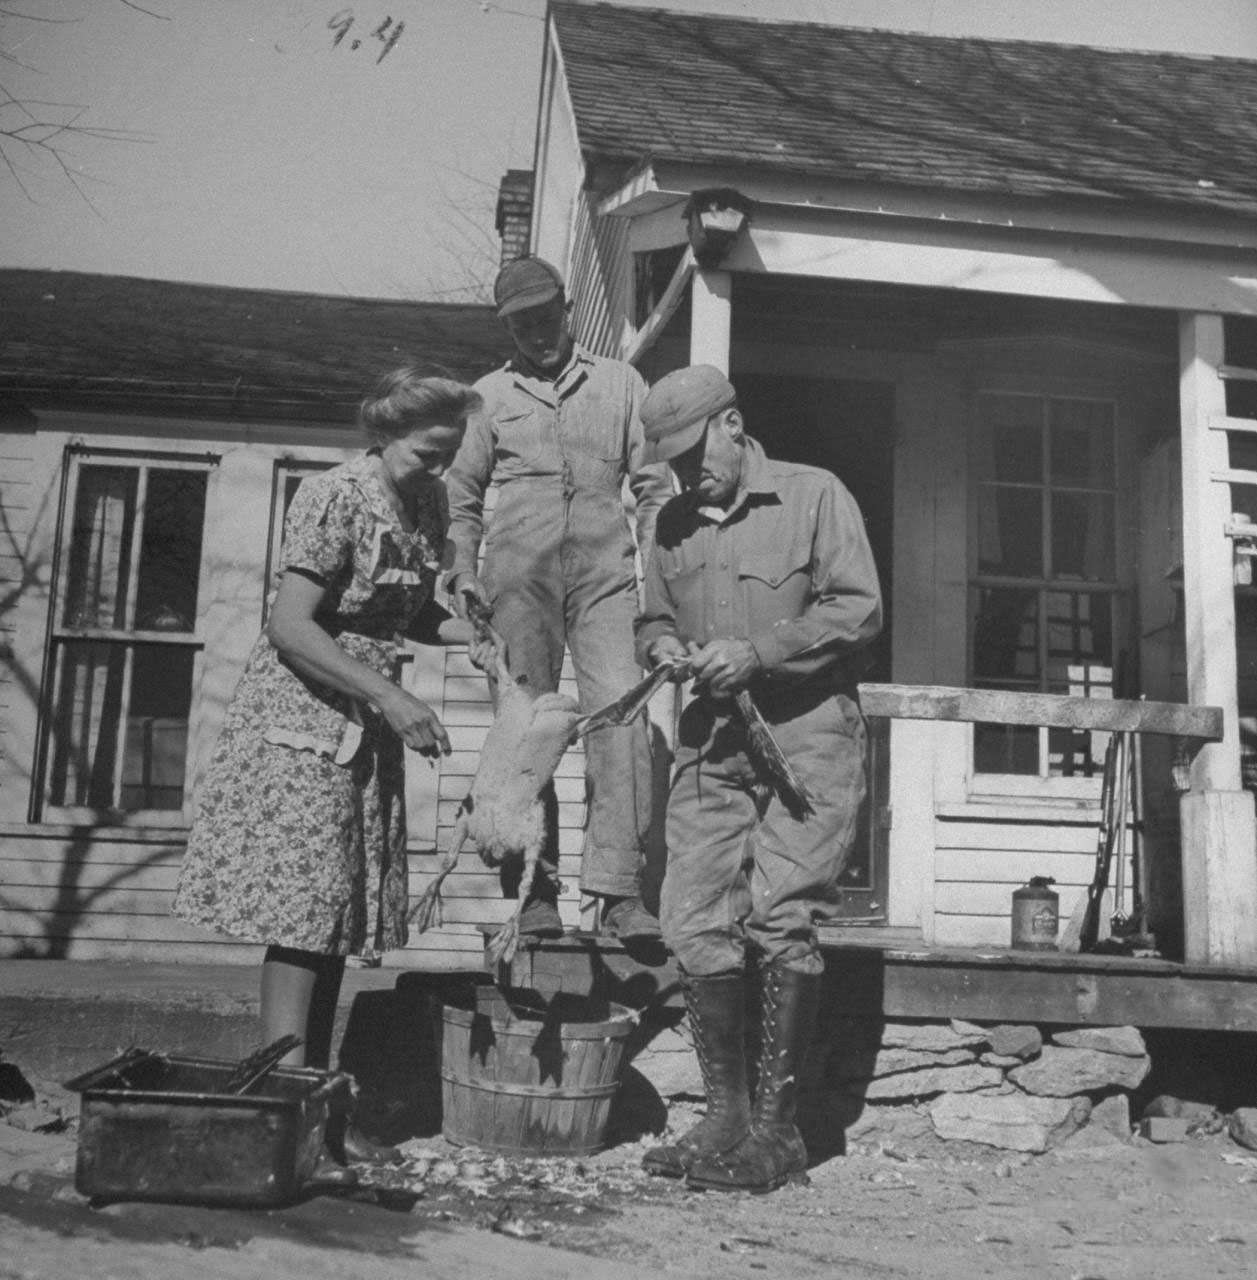 James F. Irwin (R), his wife and son preparing a goose for an early Christmas dinner to celebrate safe return of sons and sons-in-law from WW II.